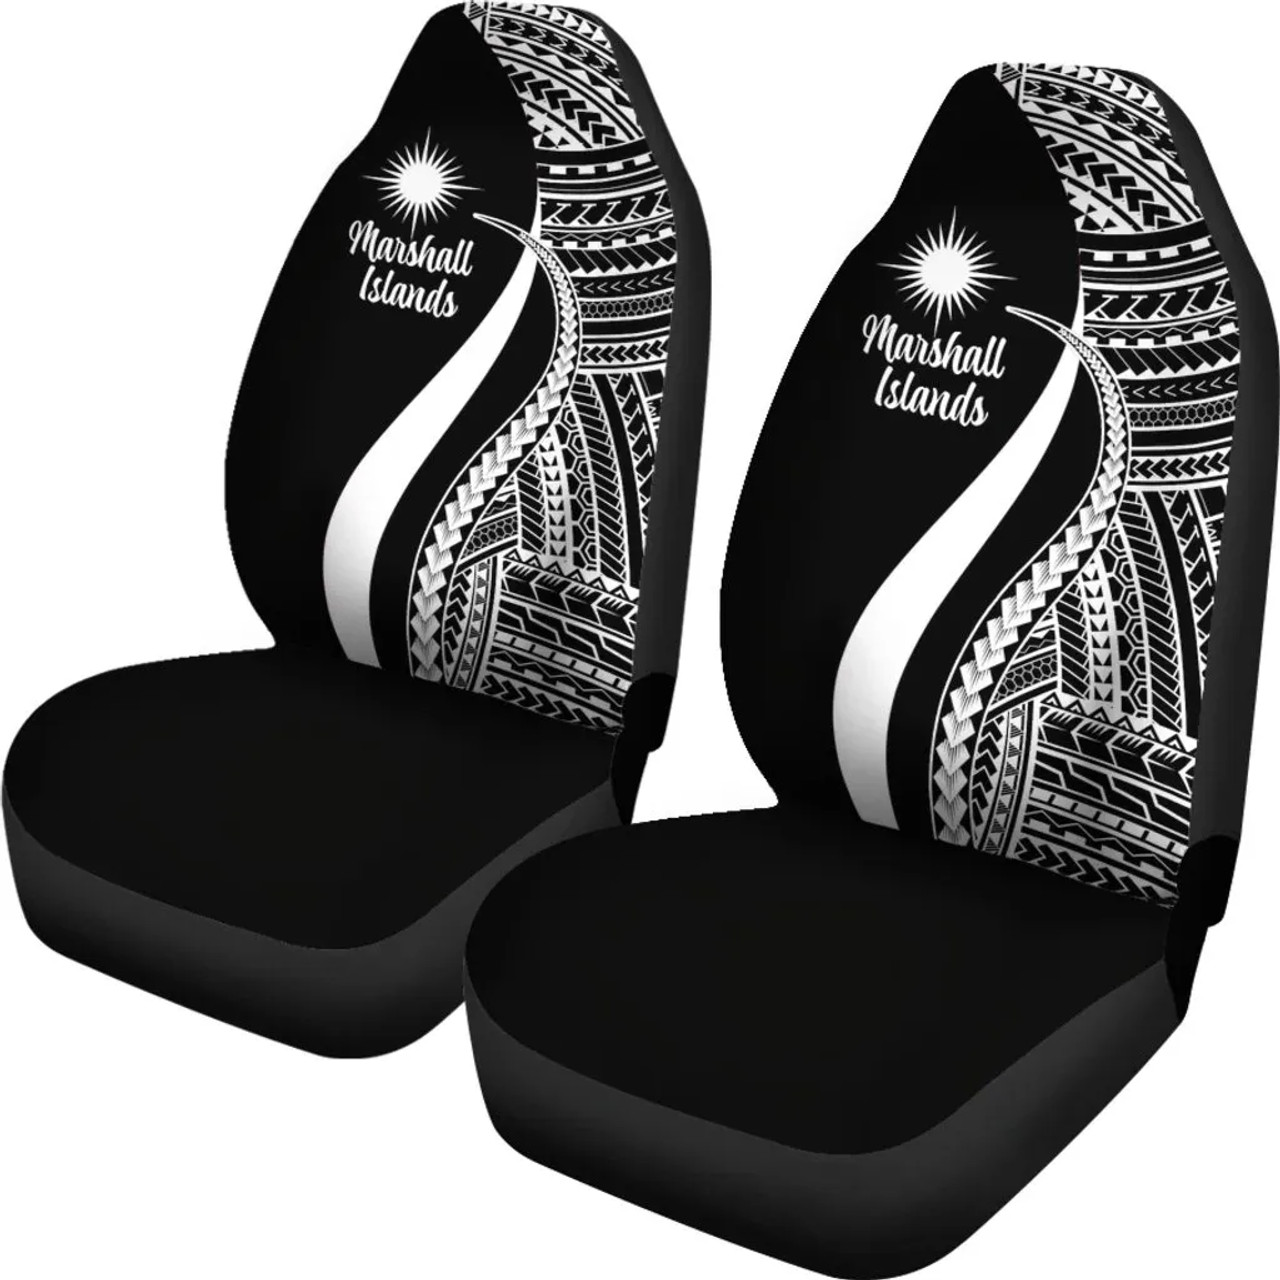 Marshall Islands Car Seat Covers - White Polynesian Tentacle Tribal Pattern